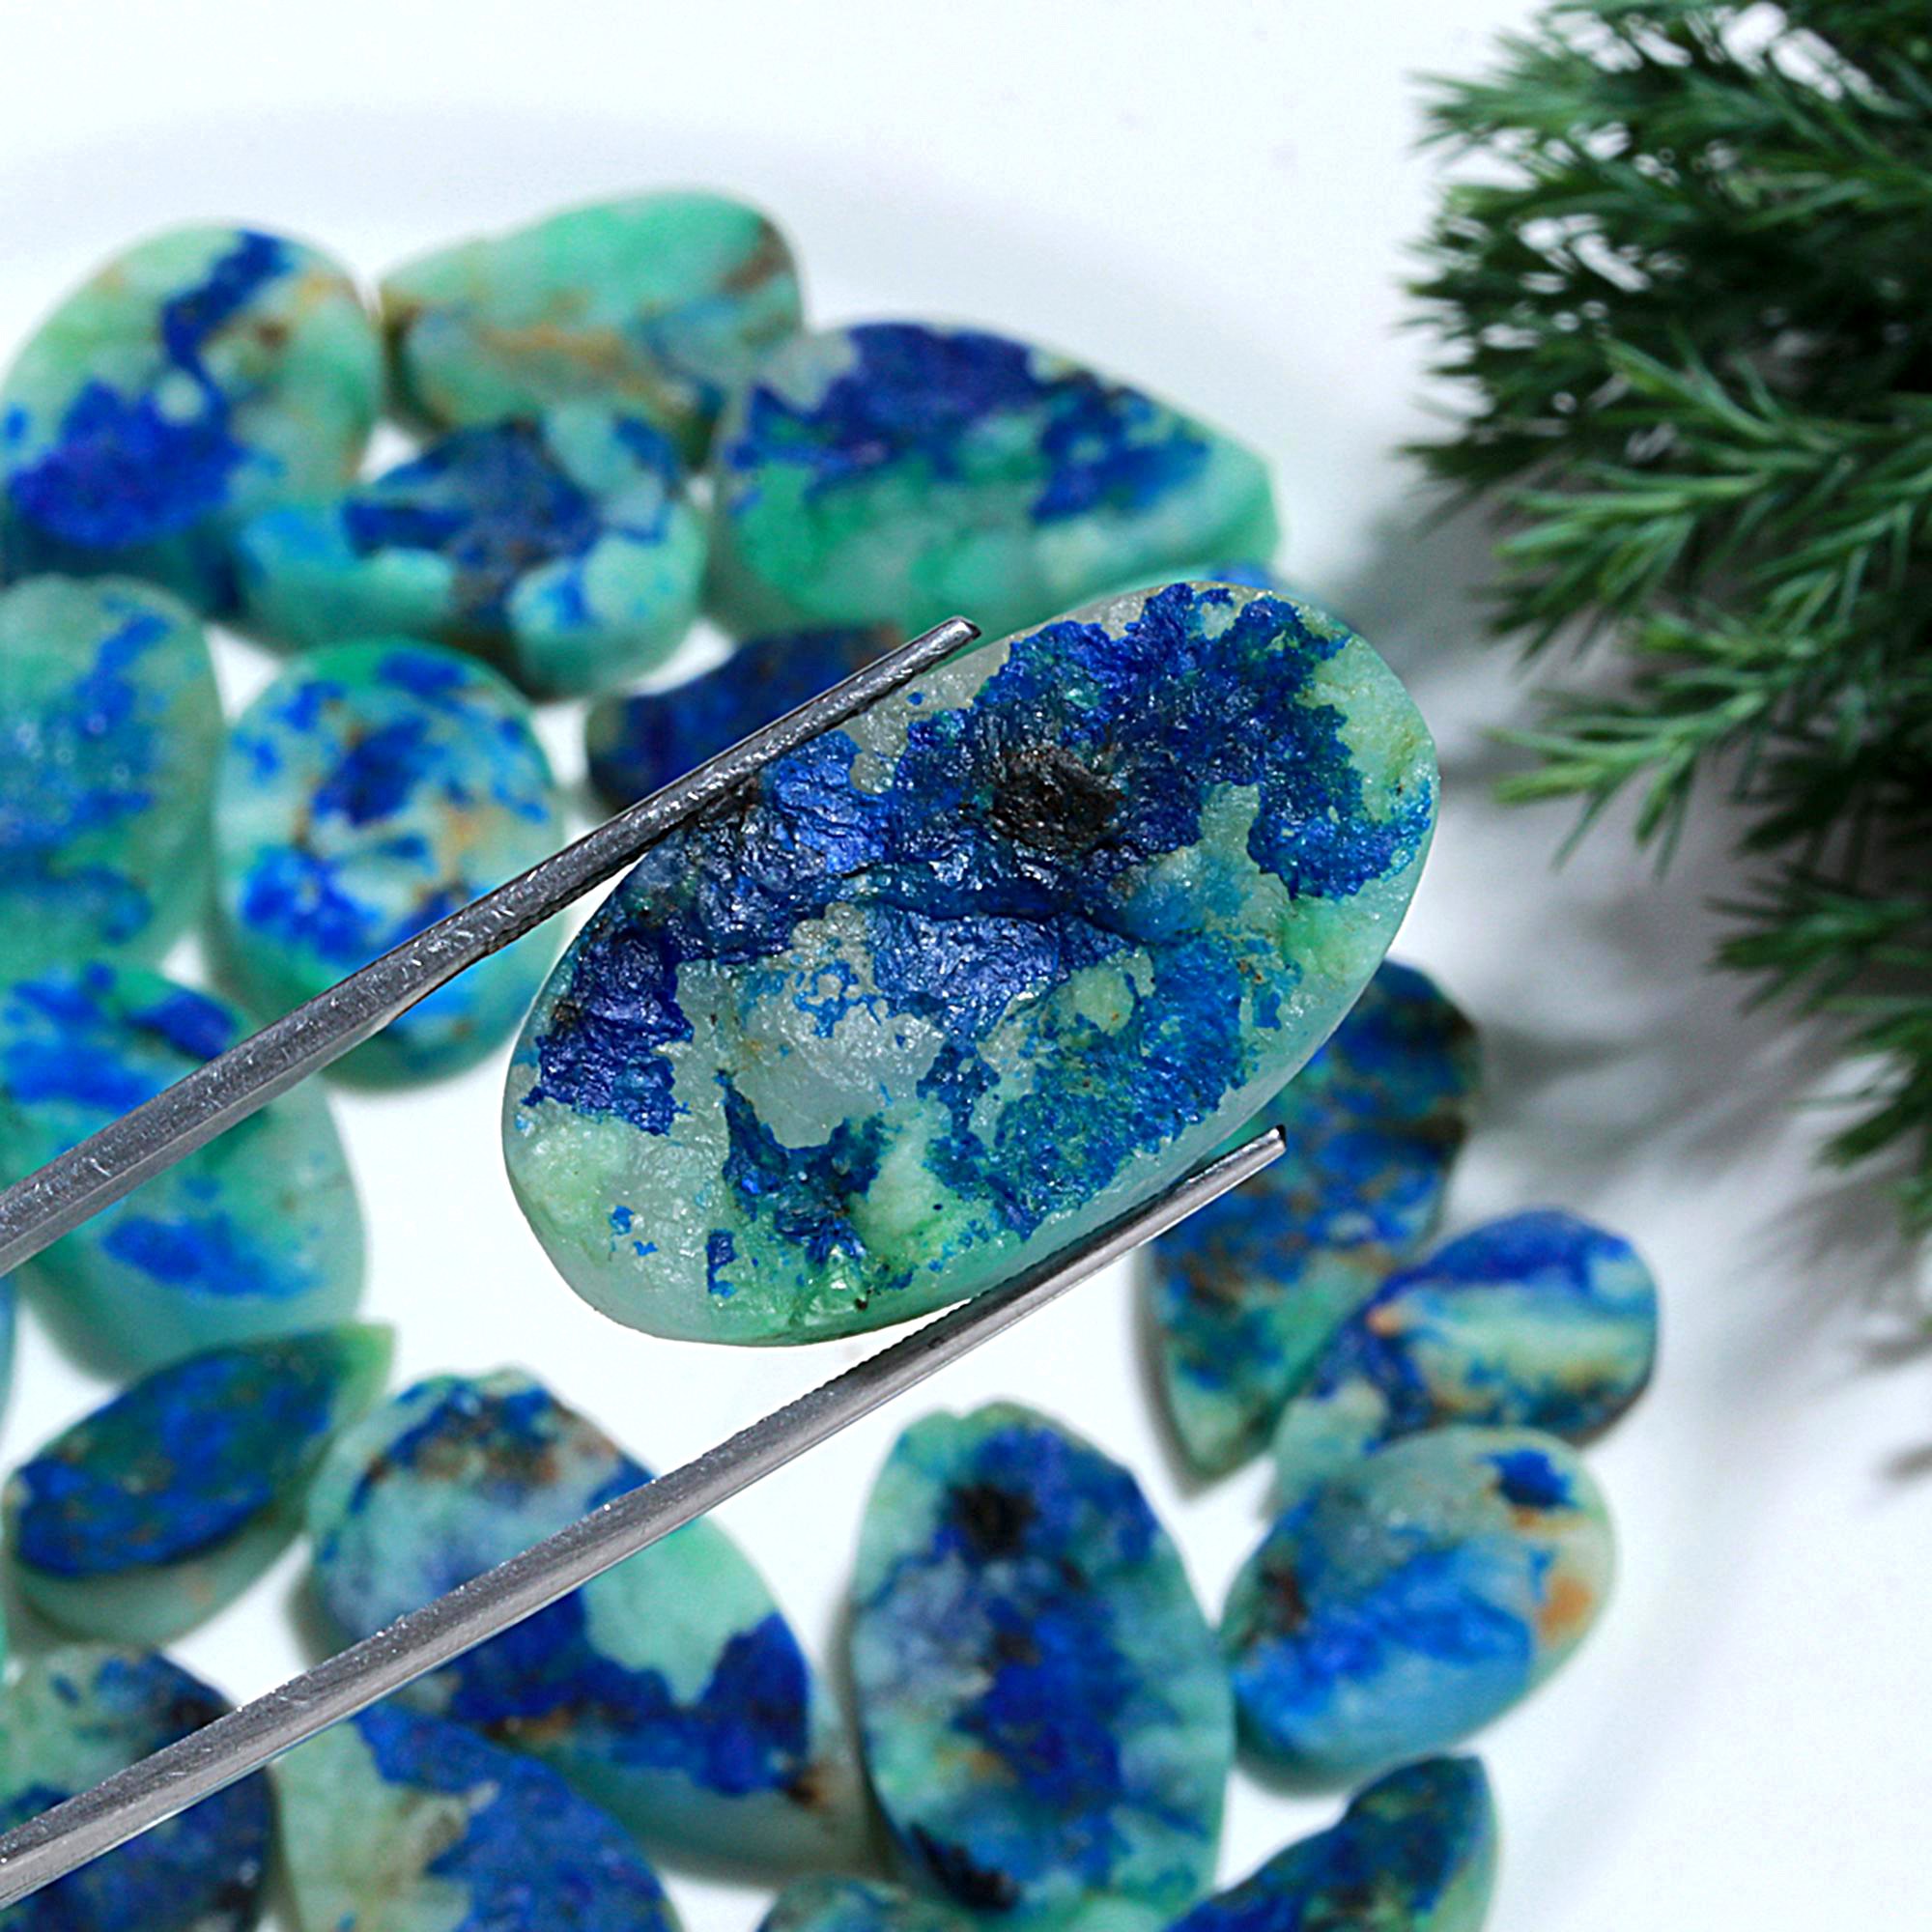 40 Pcs 570.Cts Natural Azurite Druzy Unpolished Loose Cabochon Gemstone For Jewelry Wholesale Lot Size 31x17 17x13mm